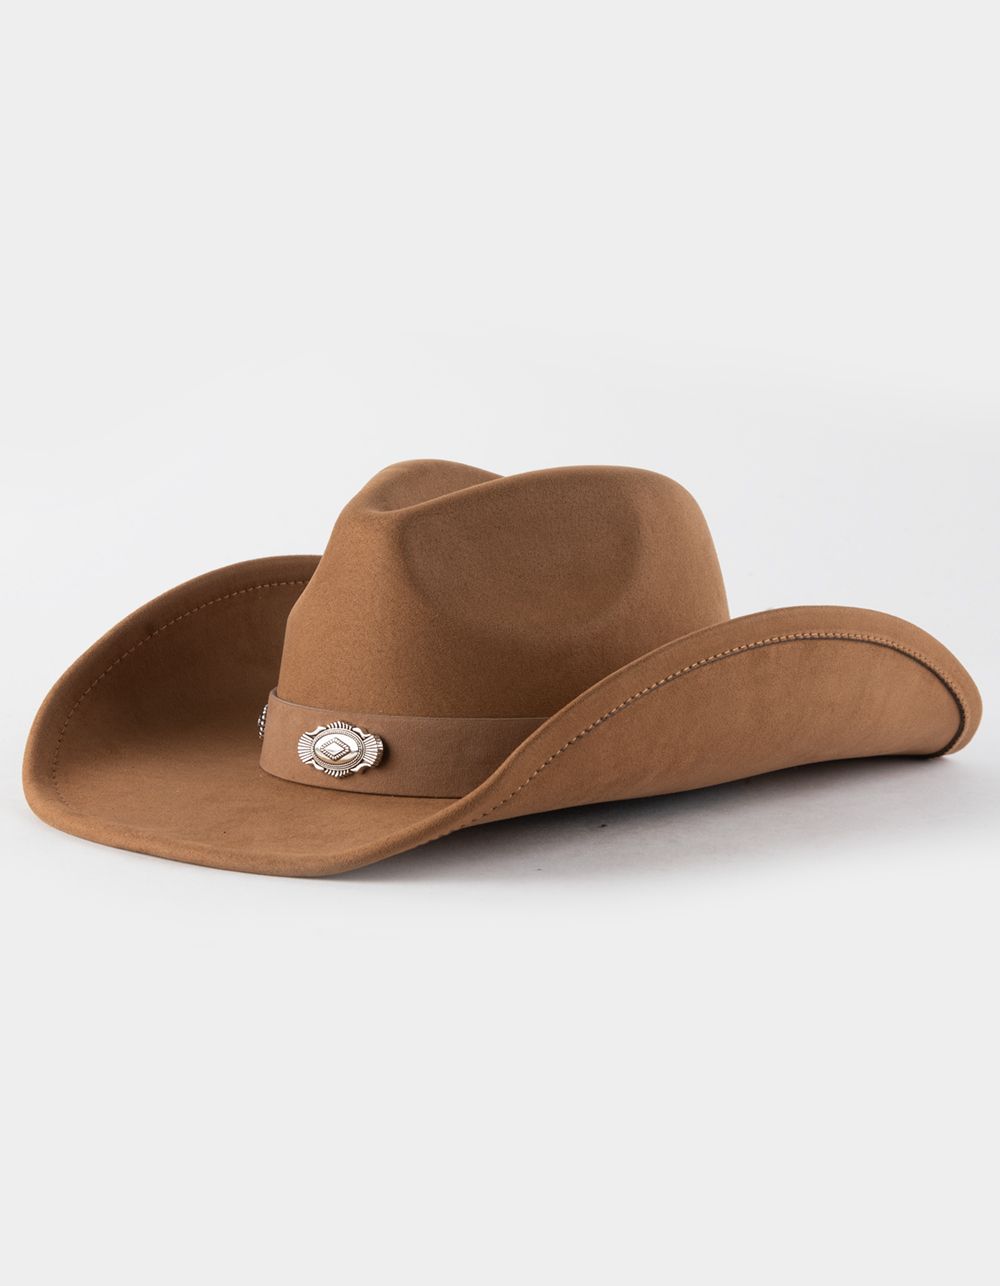 Stone Band Womens Cowboy Hat | Tillys